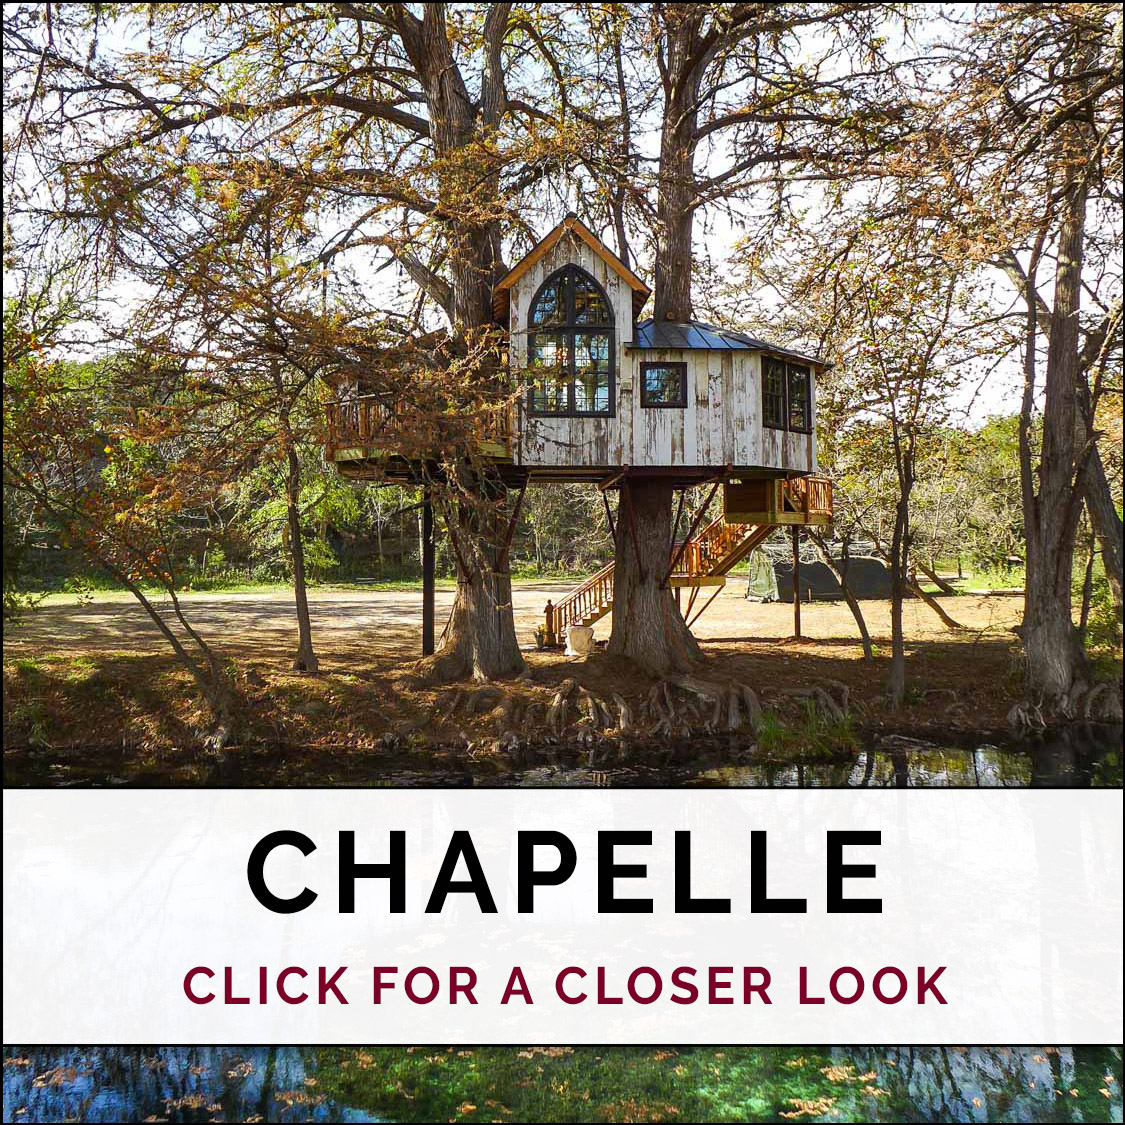  Chapelle at Treehouse Utopia 